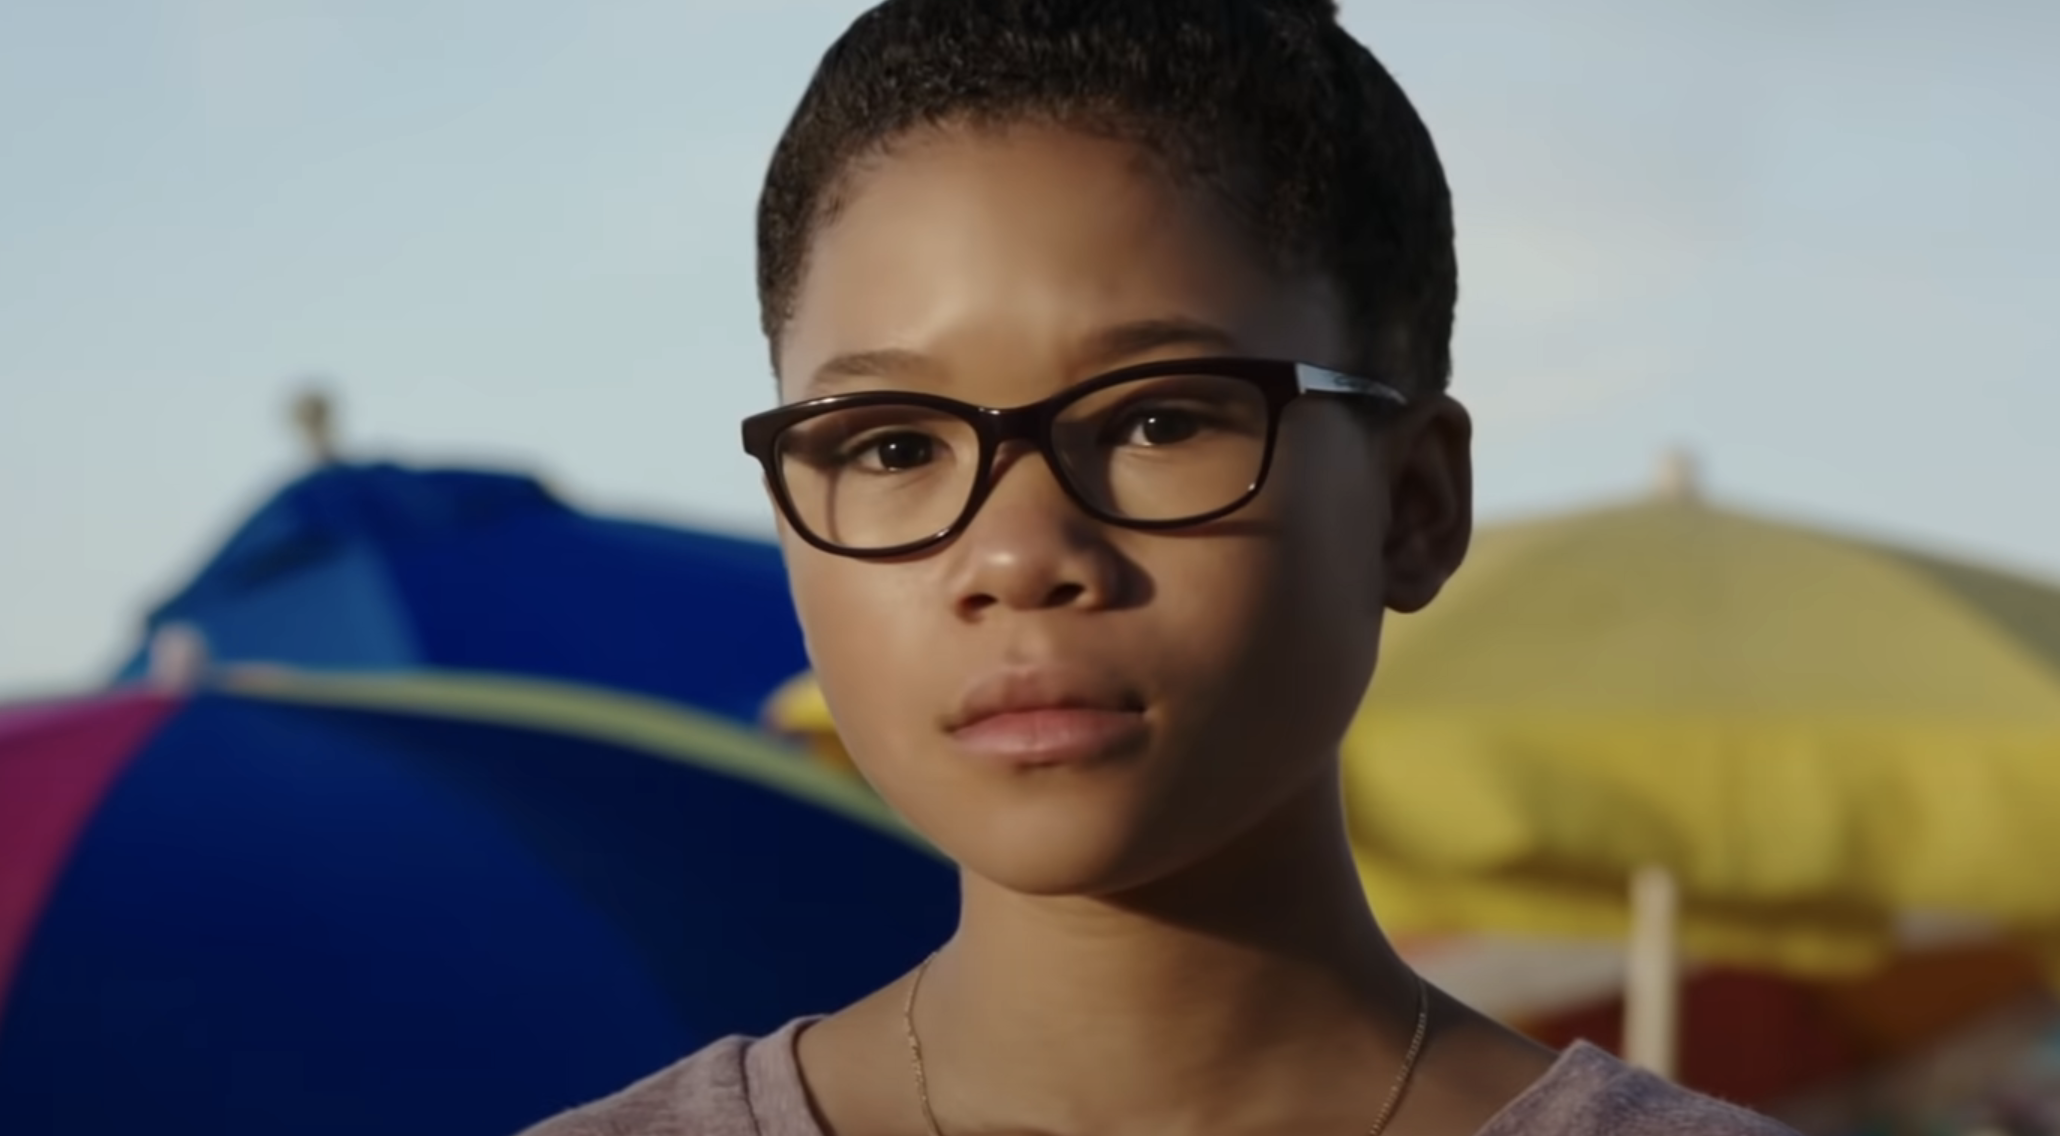 young storm in the film wearing glasses